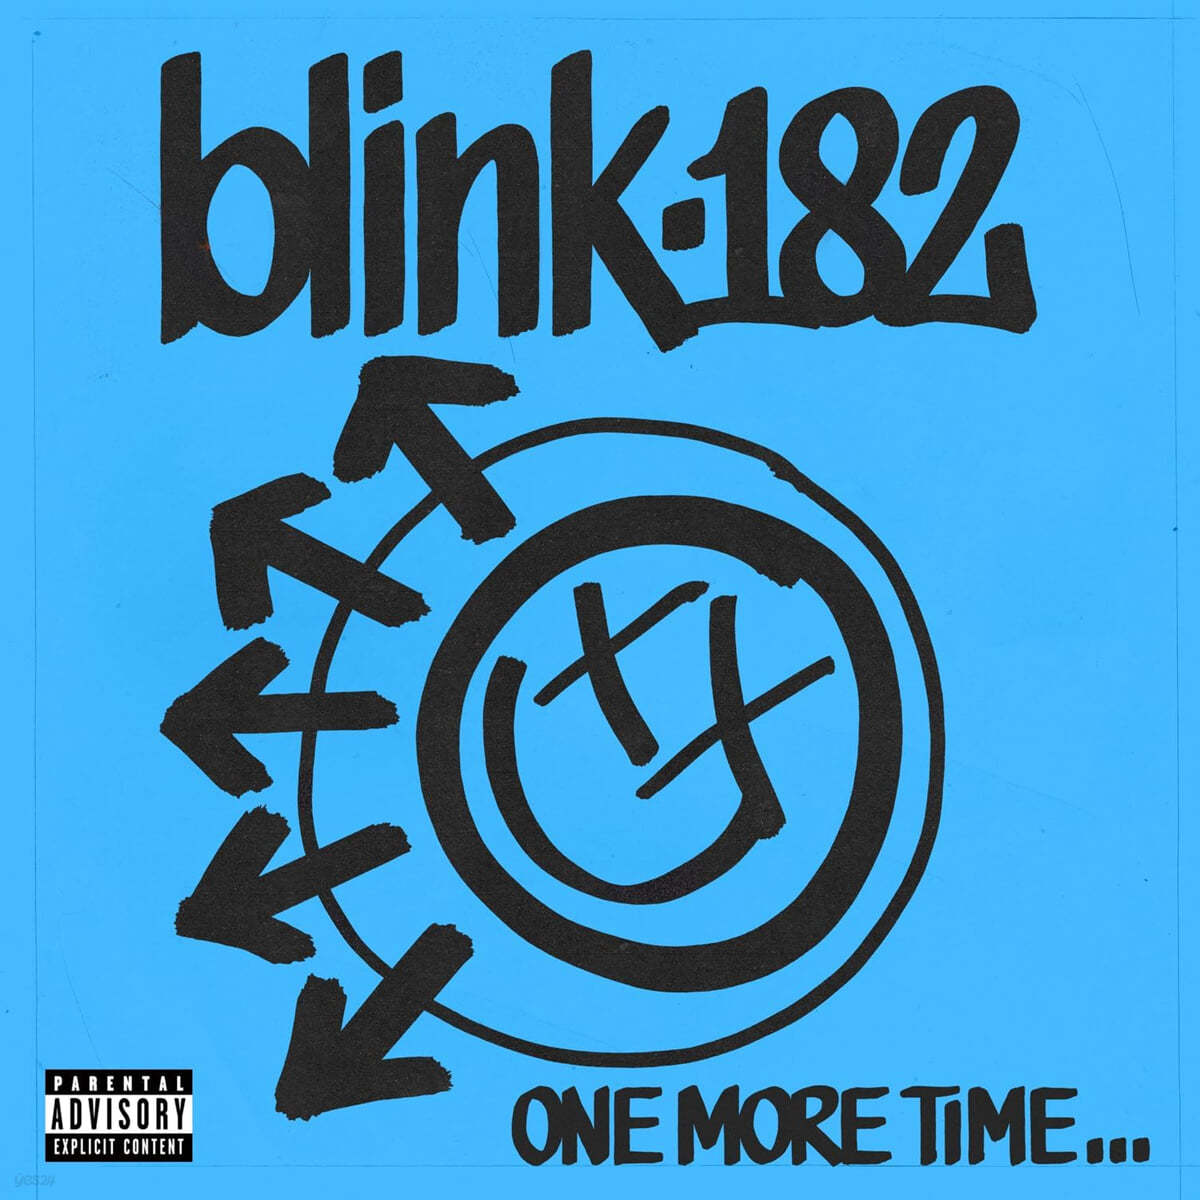 blink-182 (블링크-182) - ONE MORE TIME... 